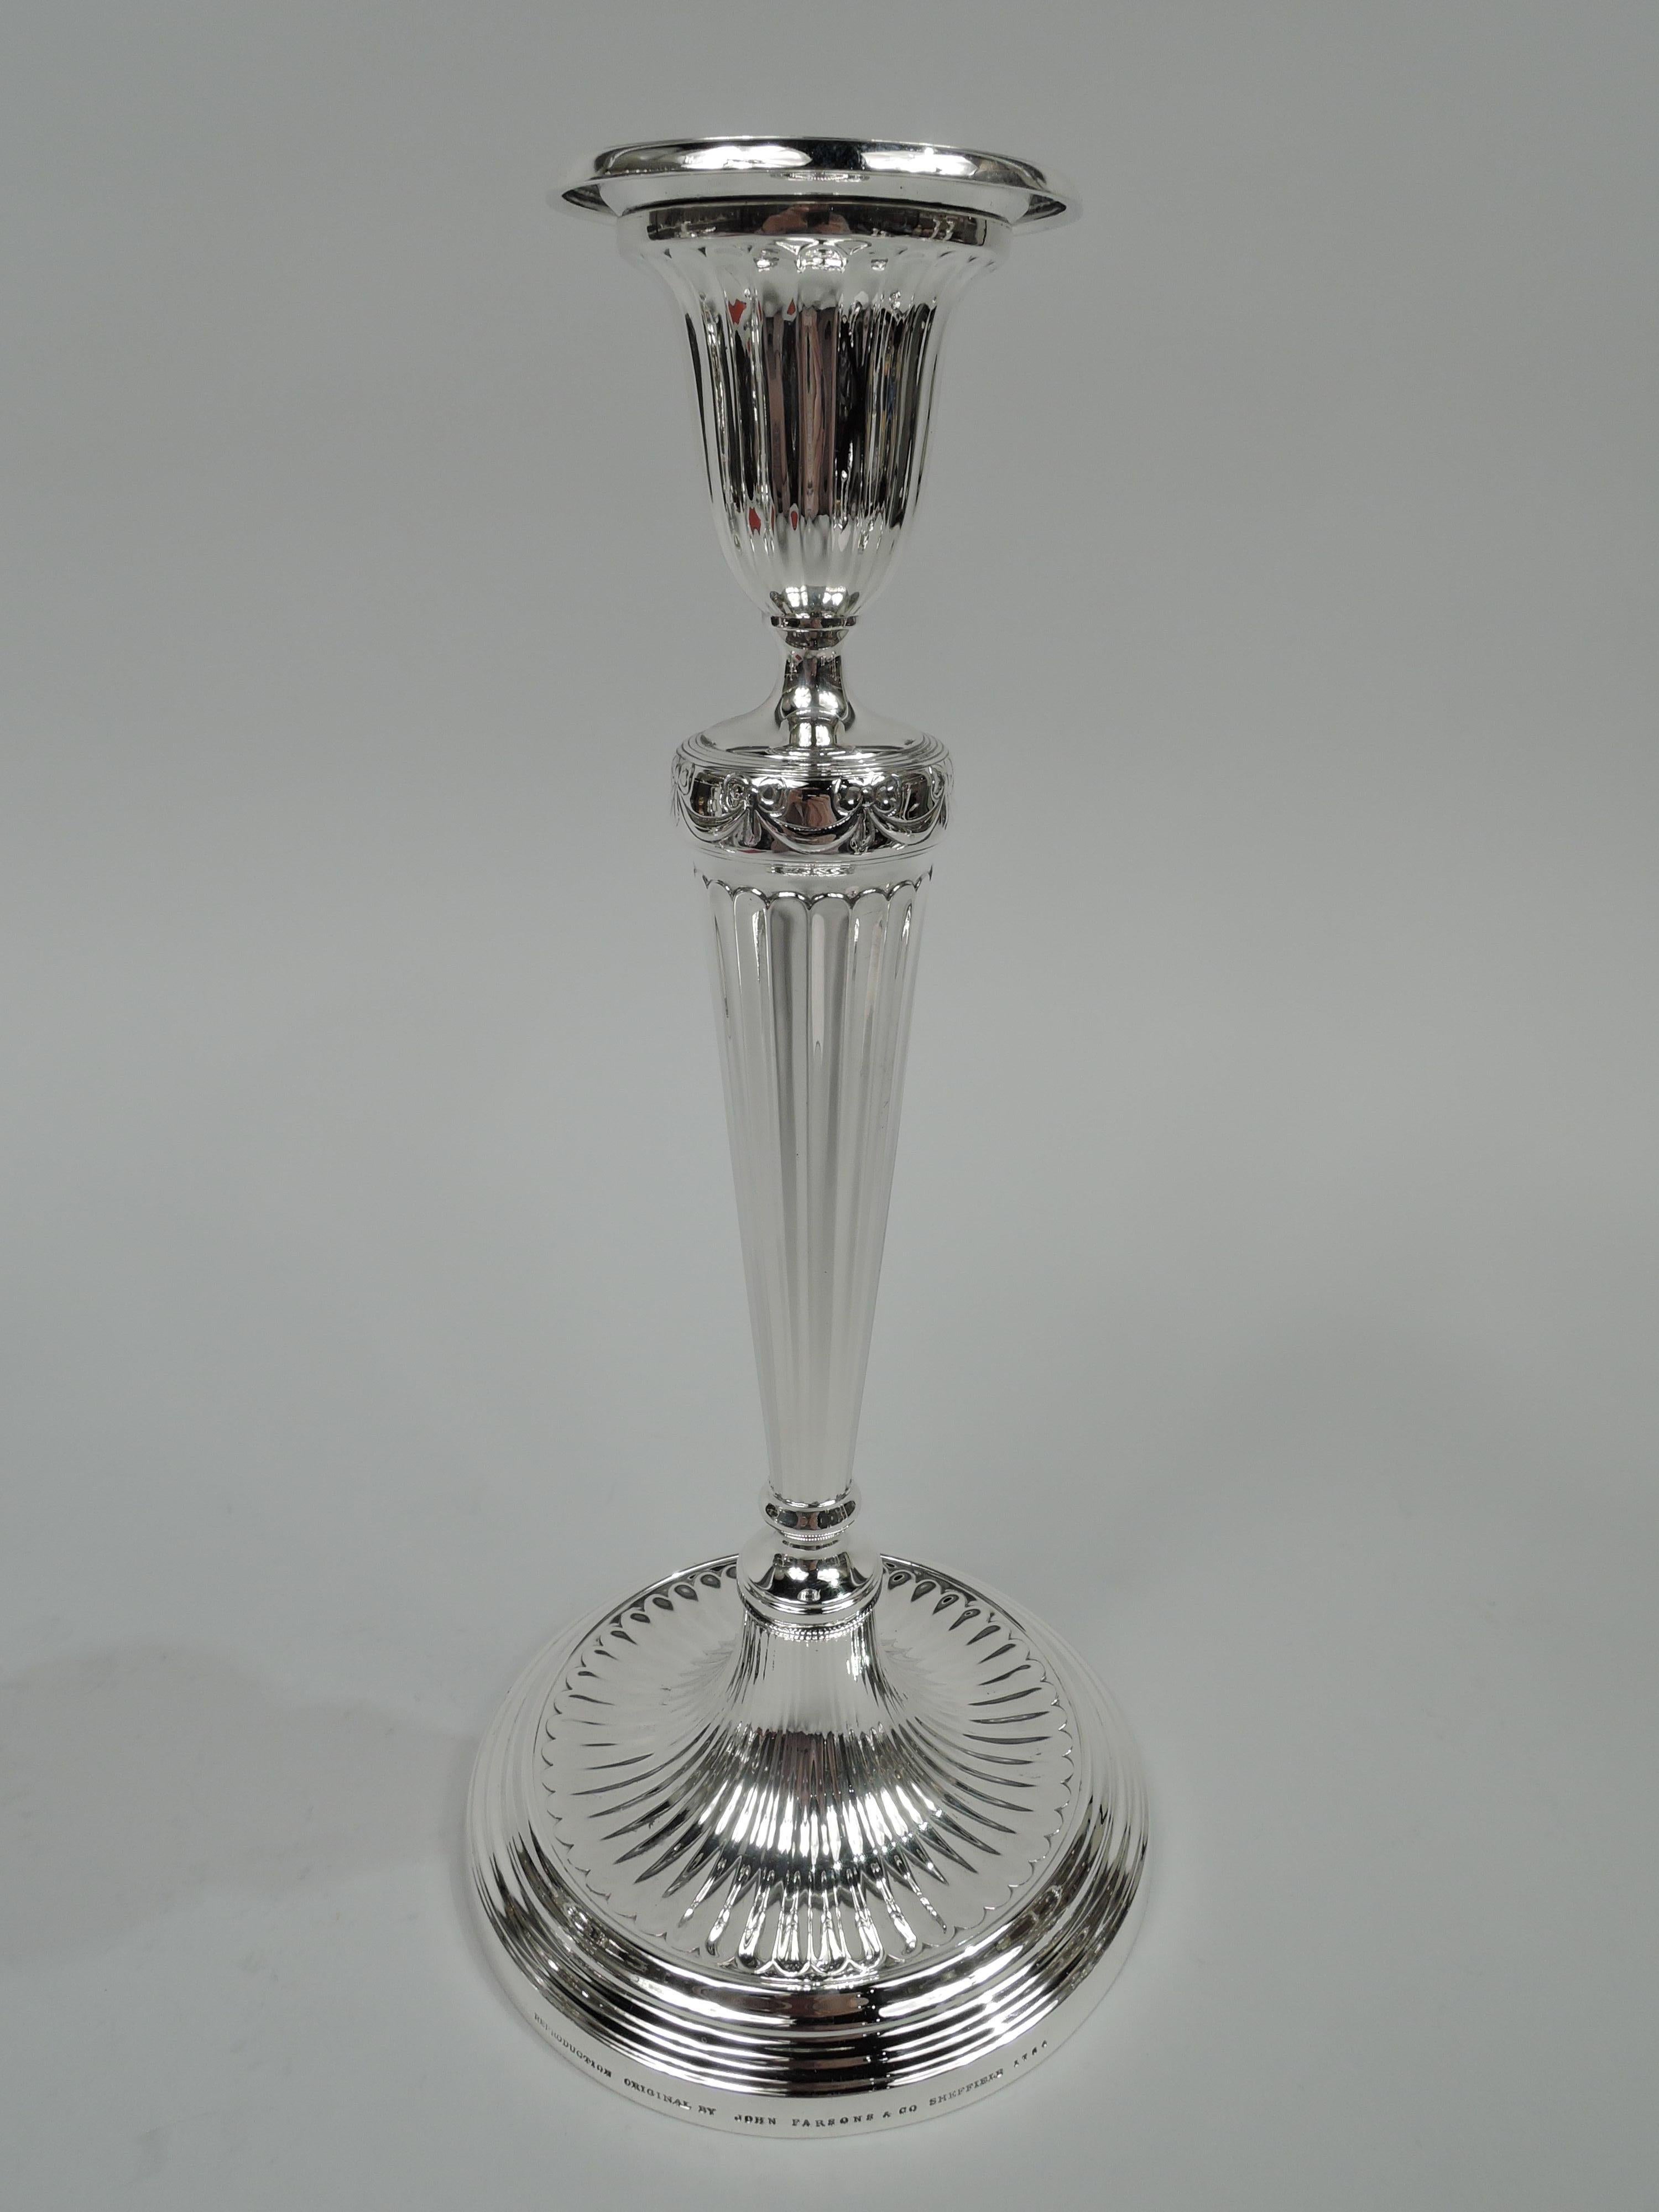 Pair of English neoclassical sterling silver candlesticks. Made by Tiffany & Co. in New York, ca 1916. Each: Tapering column on dome flowing into stepped and concave base. Tapering socket with detachable bobeche. Ribboned swags. Fine fluting that